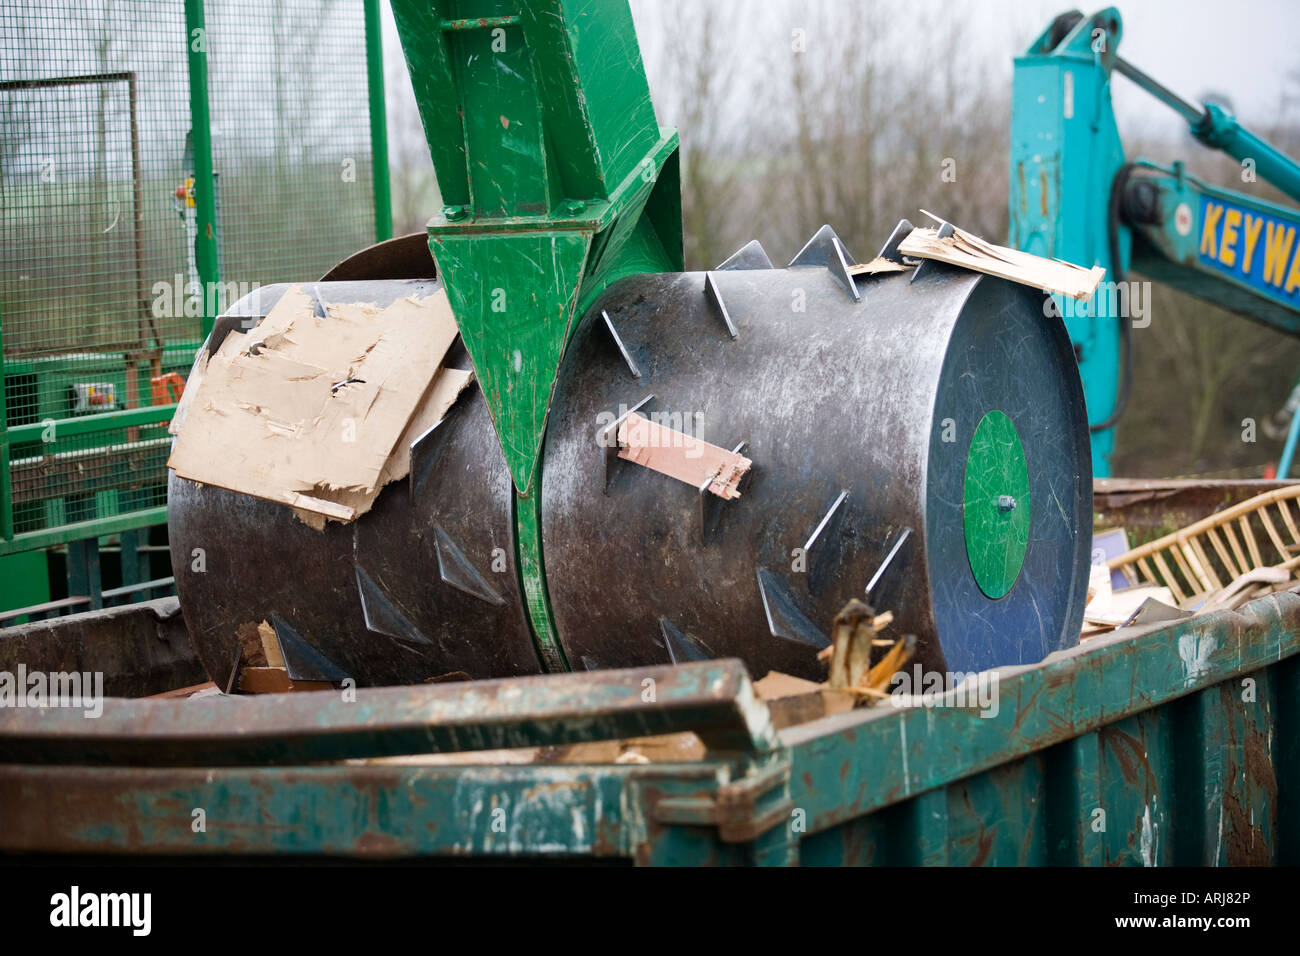 Wood recycling container at a recycling centre, UK Stock Photo